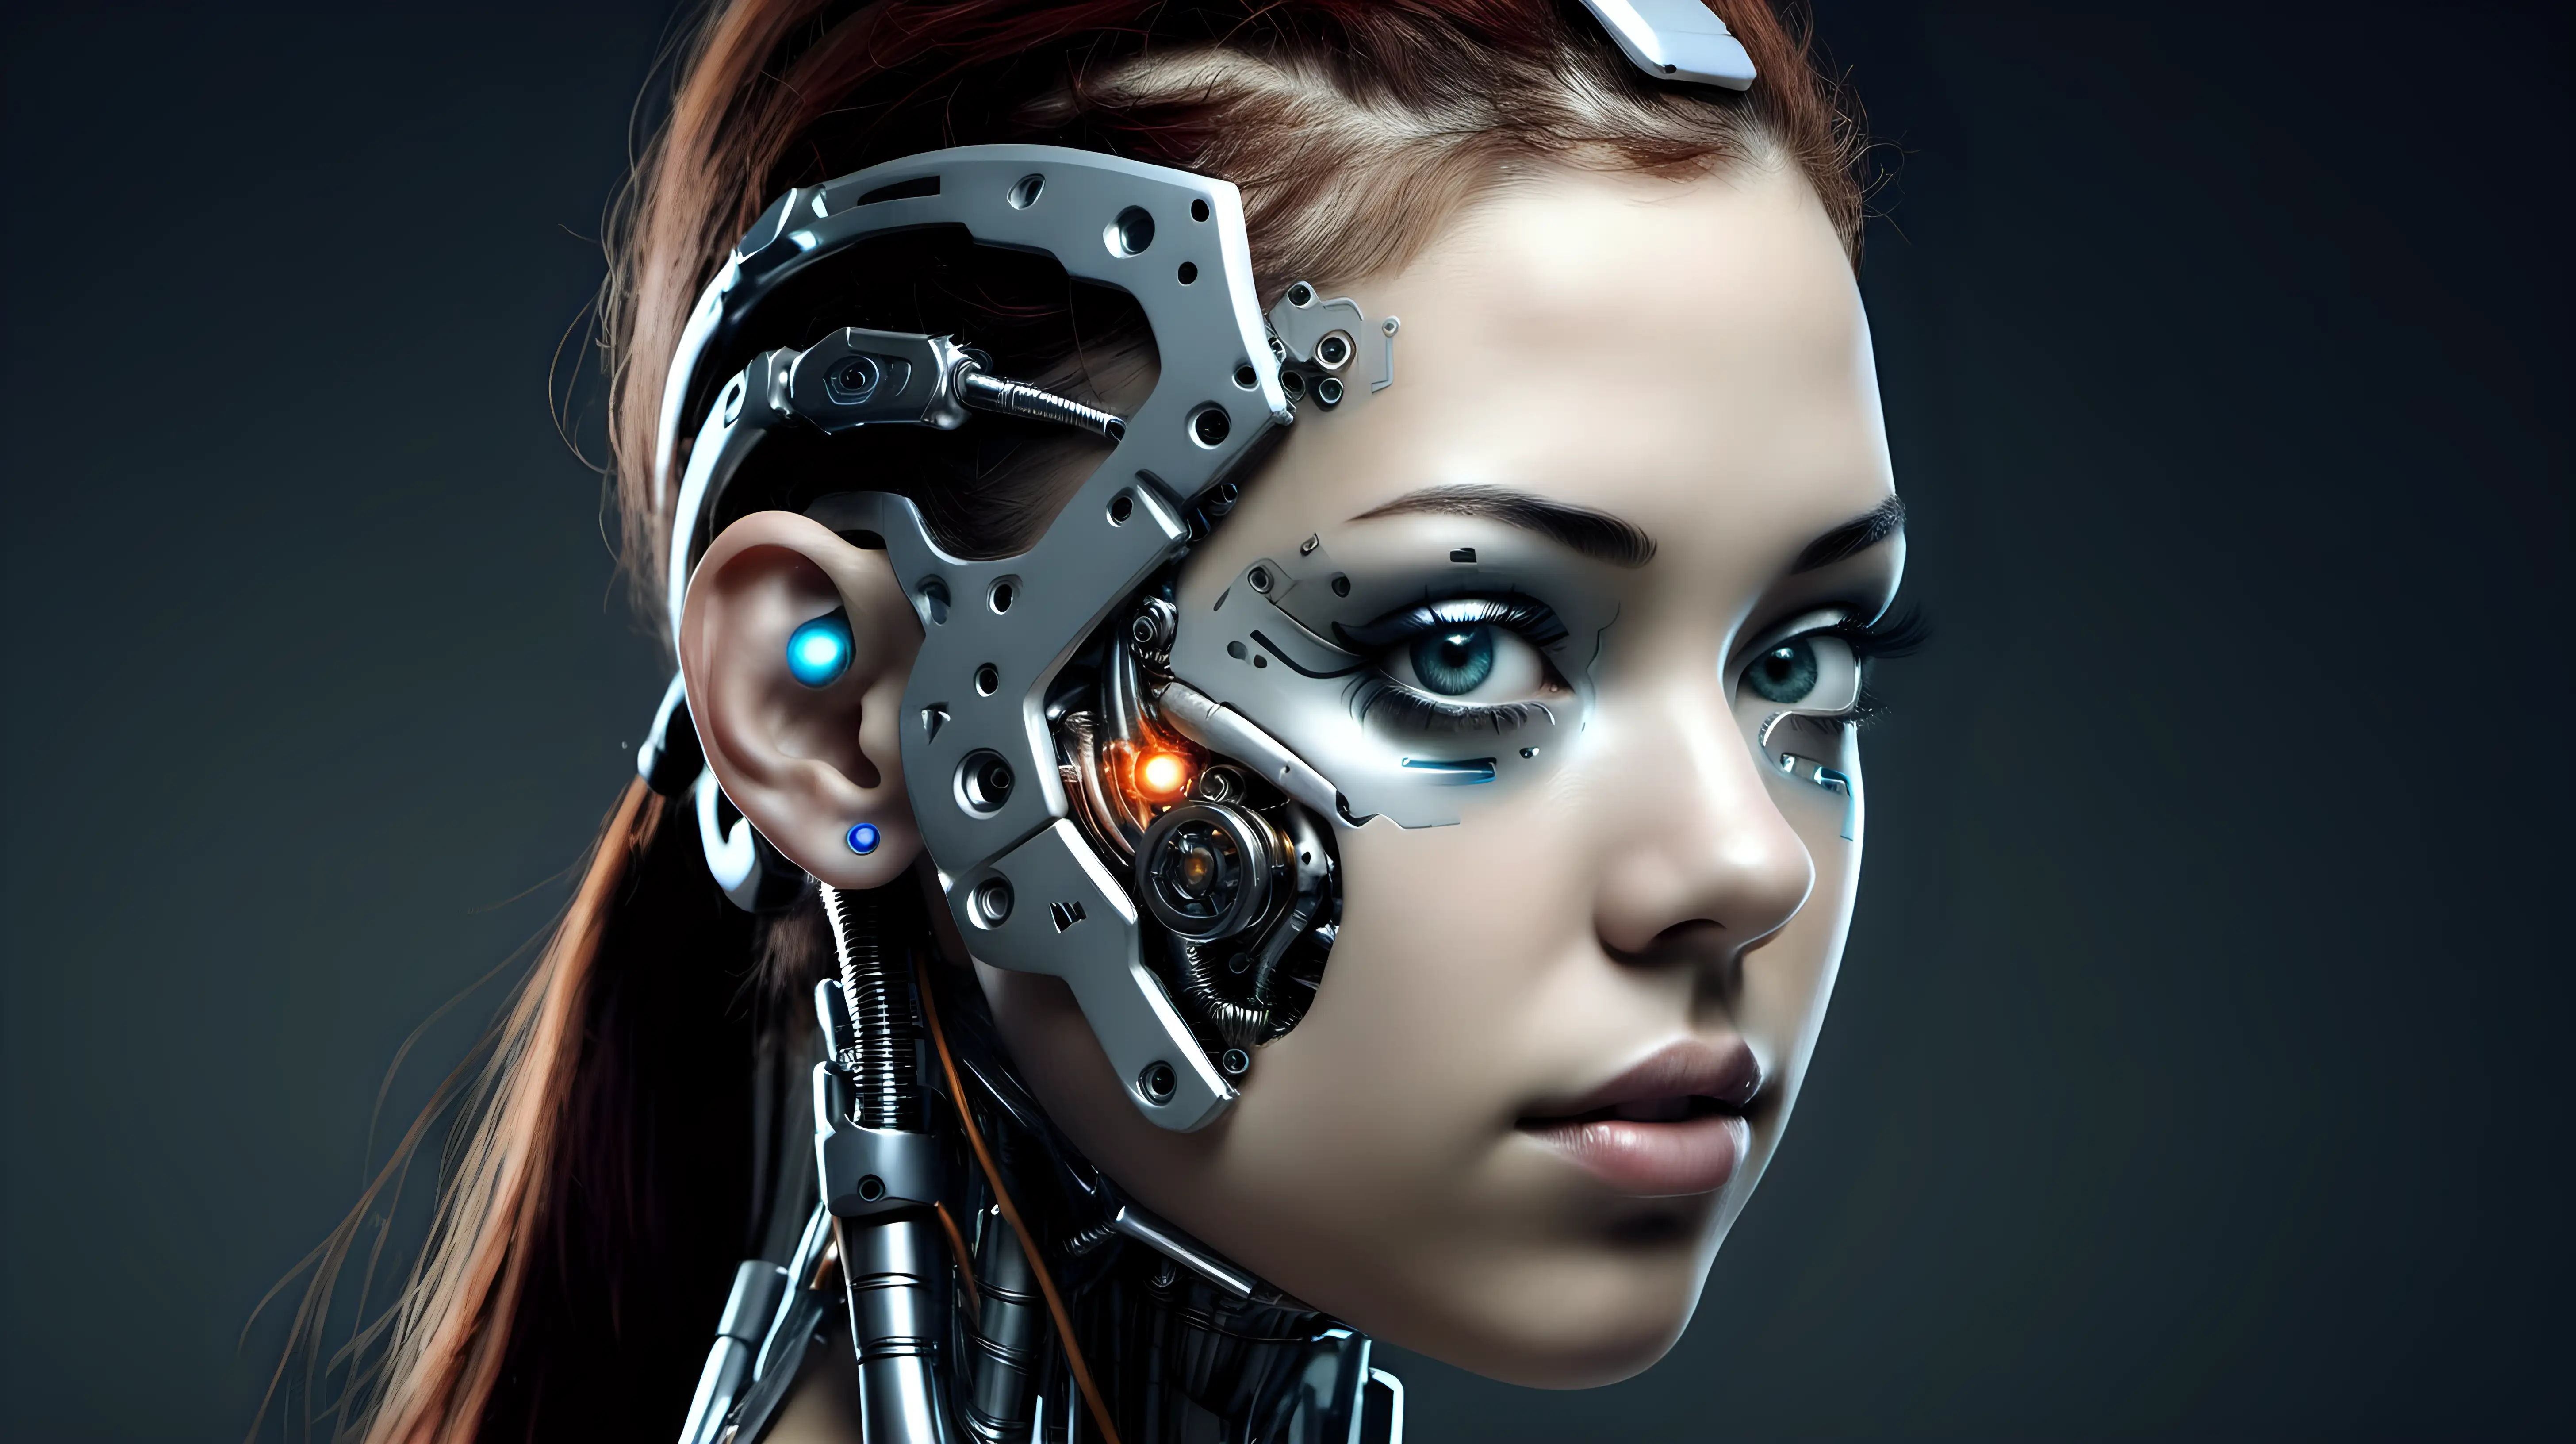 Beautiful Cyborg Woman with Enchanting Cybernetic Features